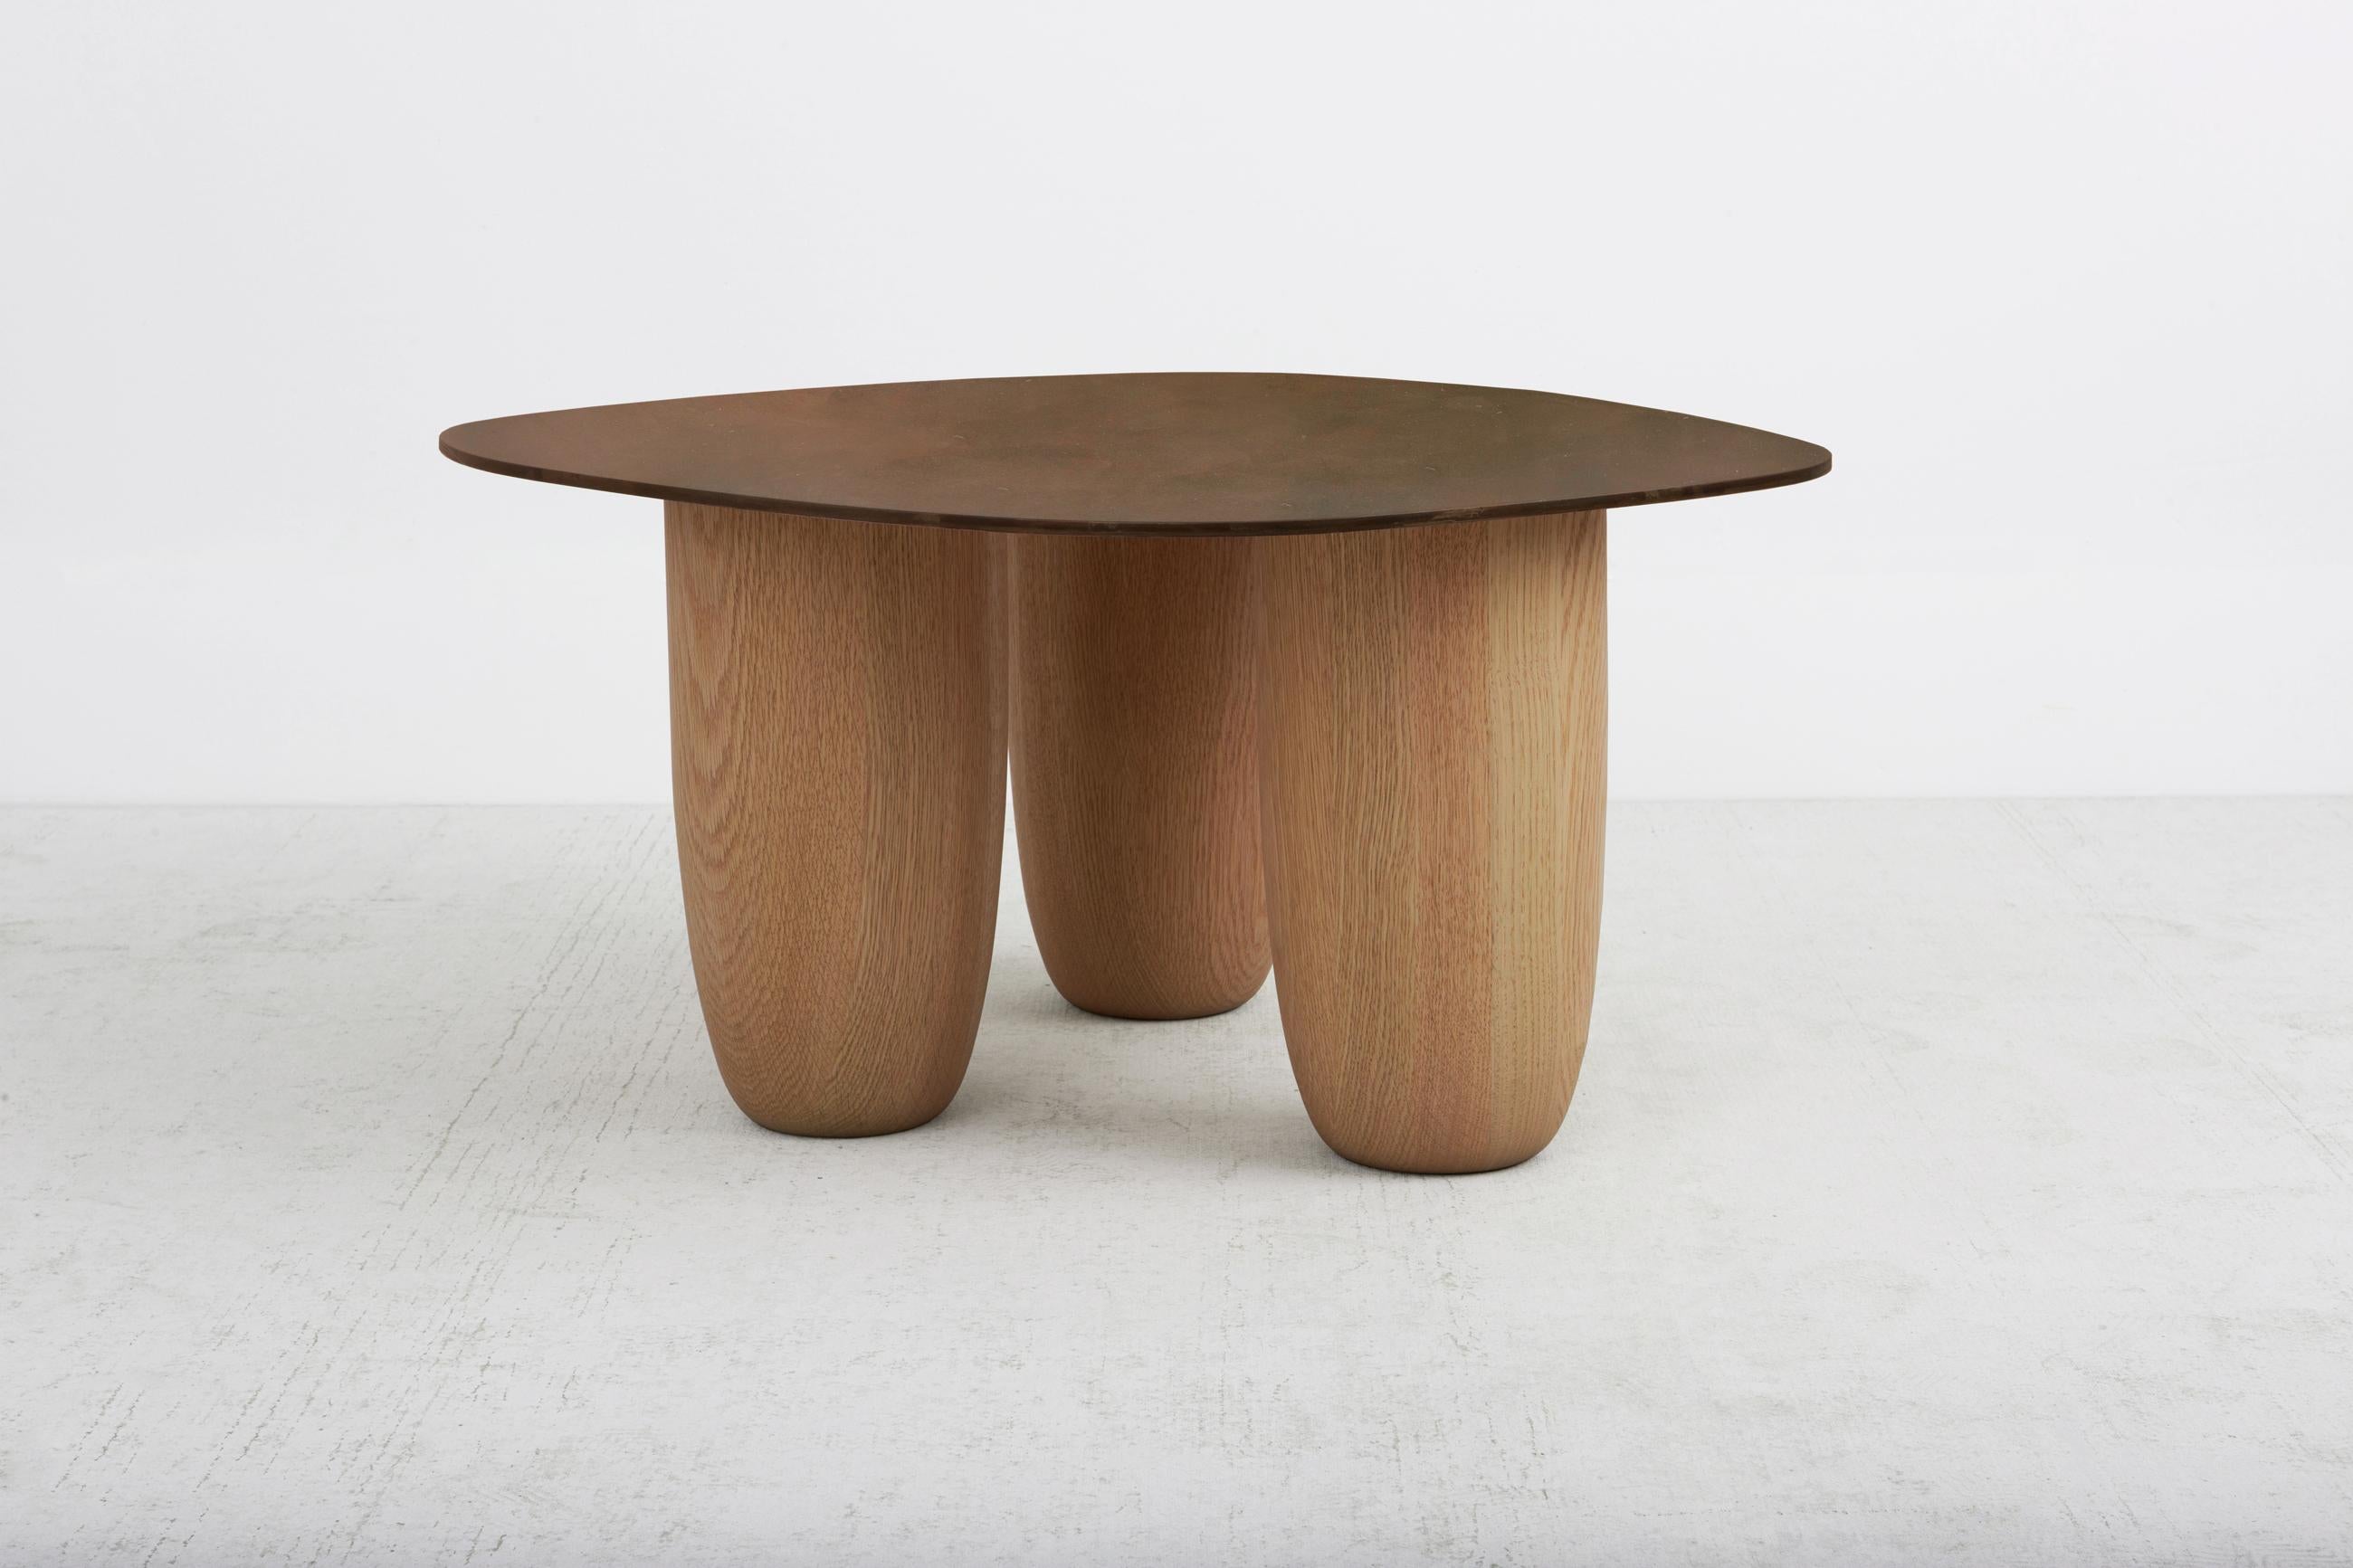 American Minimalist Low Tables Japanese Brown Patina Steel with Oak Legs Vivian Carbonell For Sale